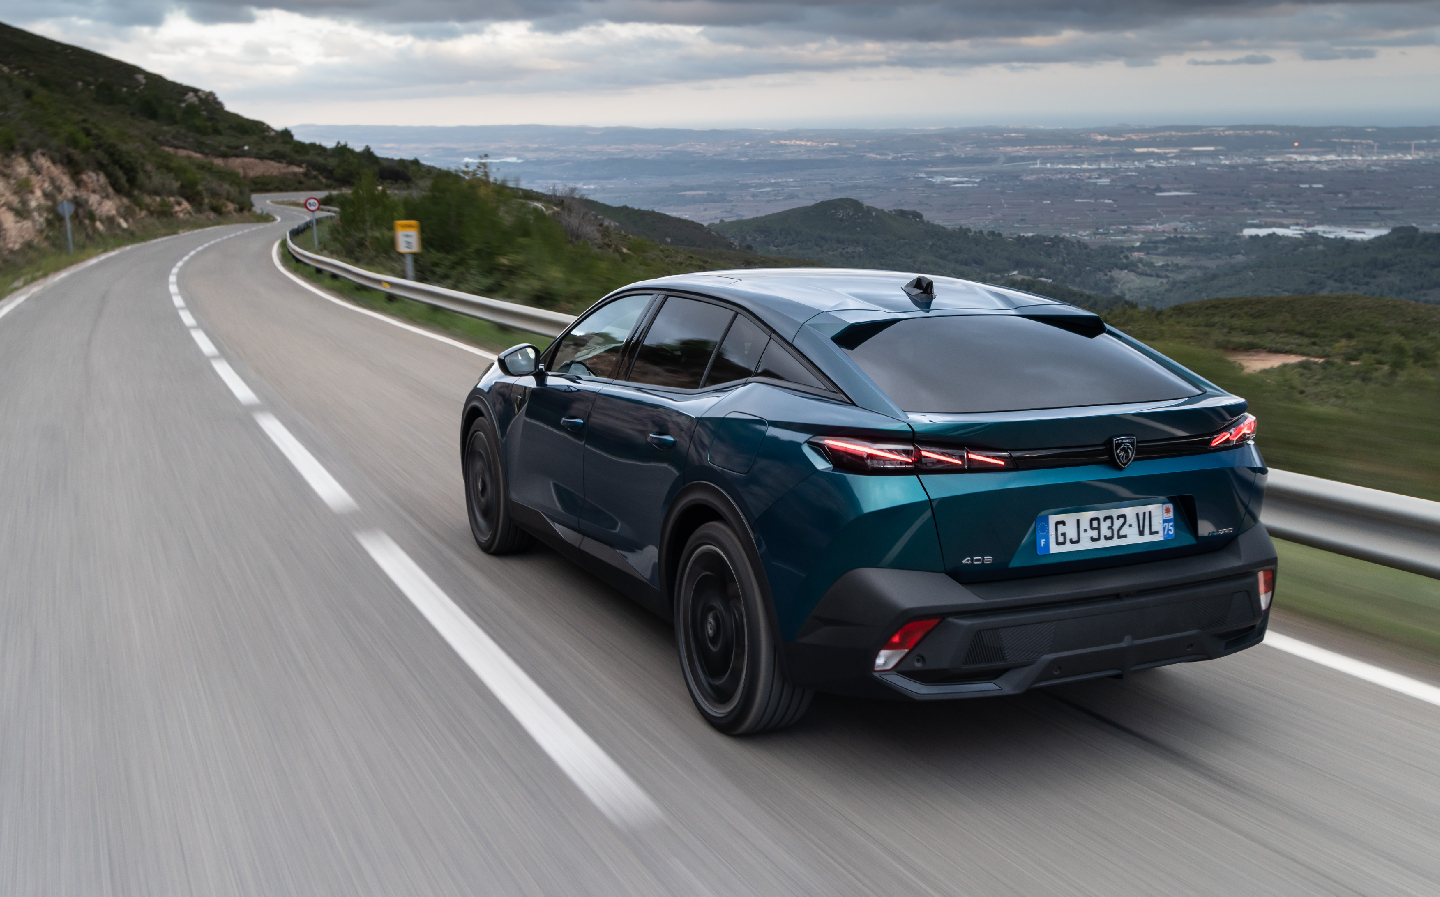 Peugeot unveils the new 408 fastback crossover globally - Team-BHP